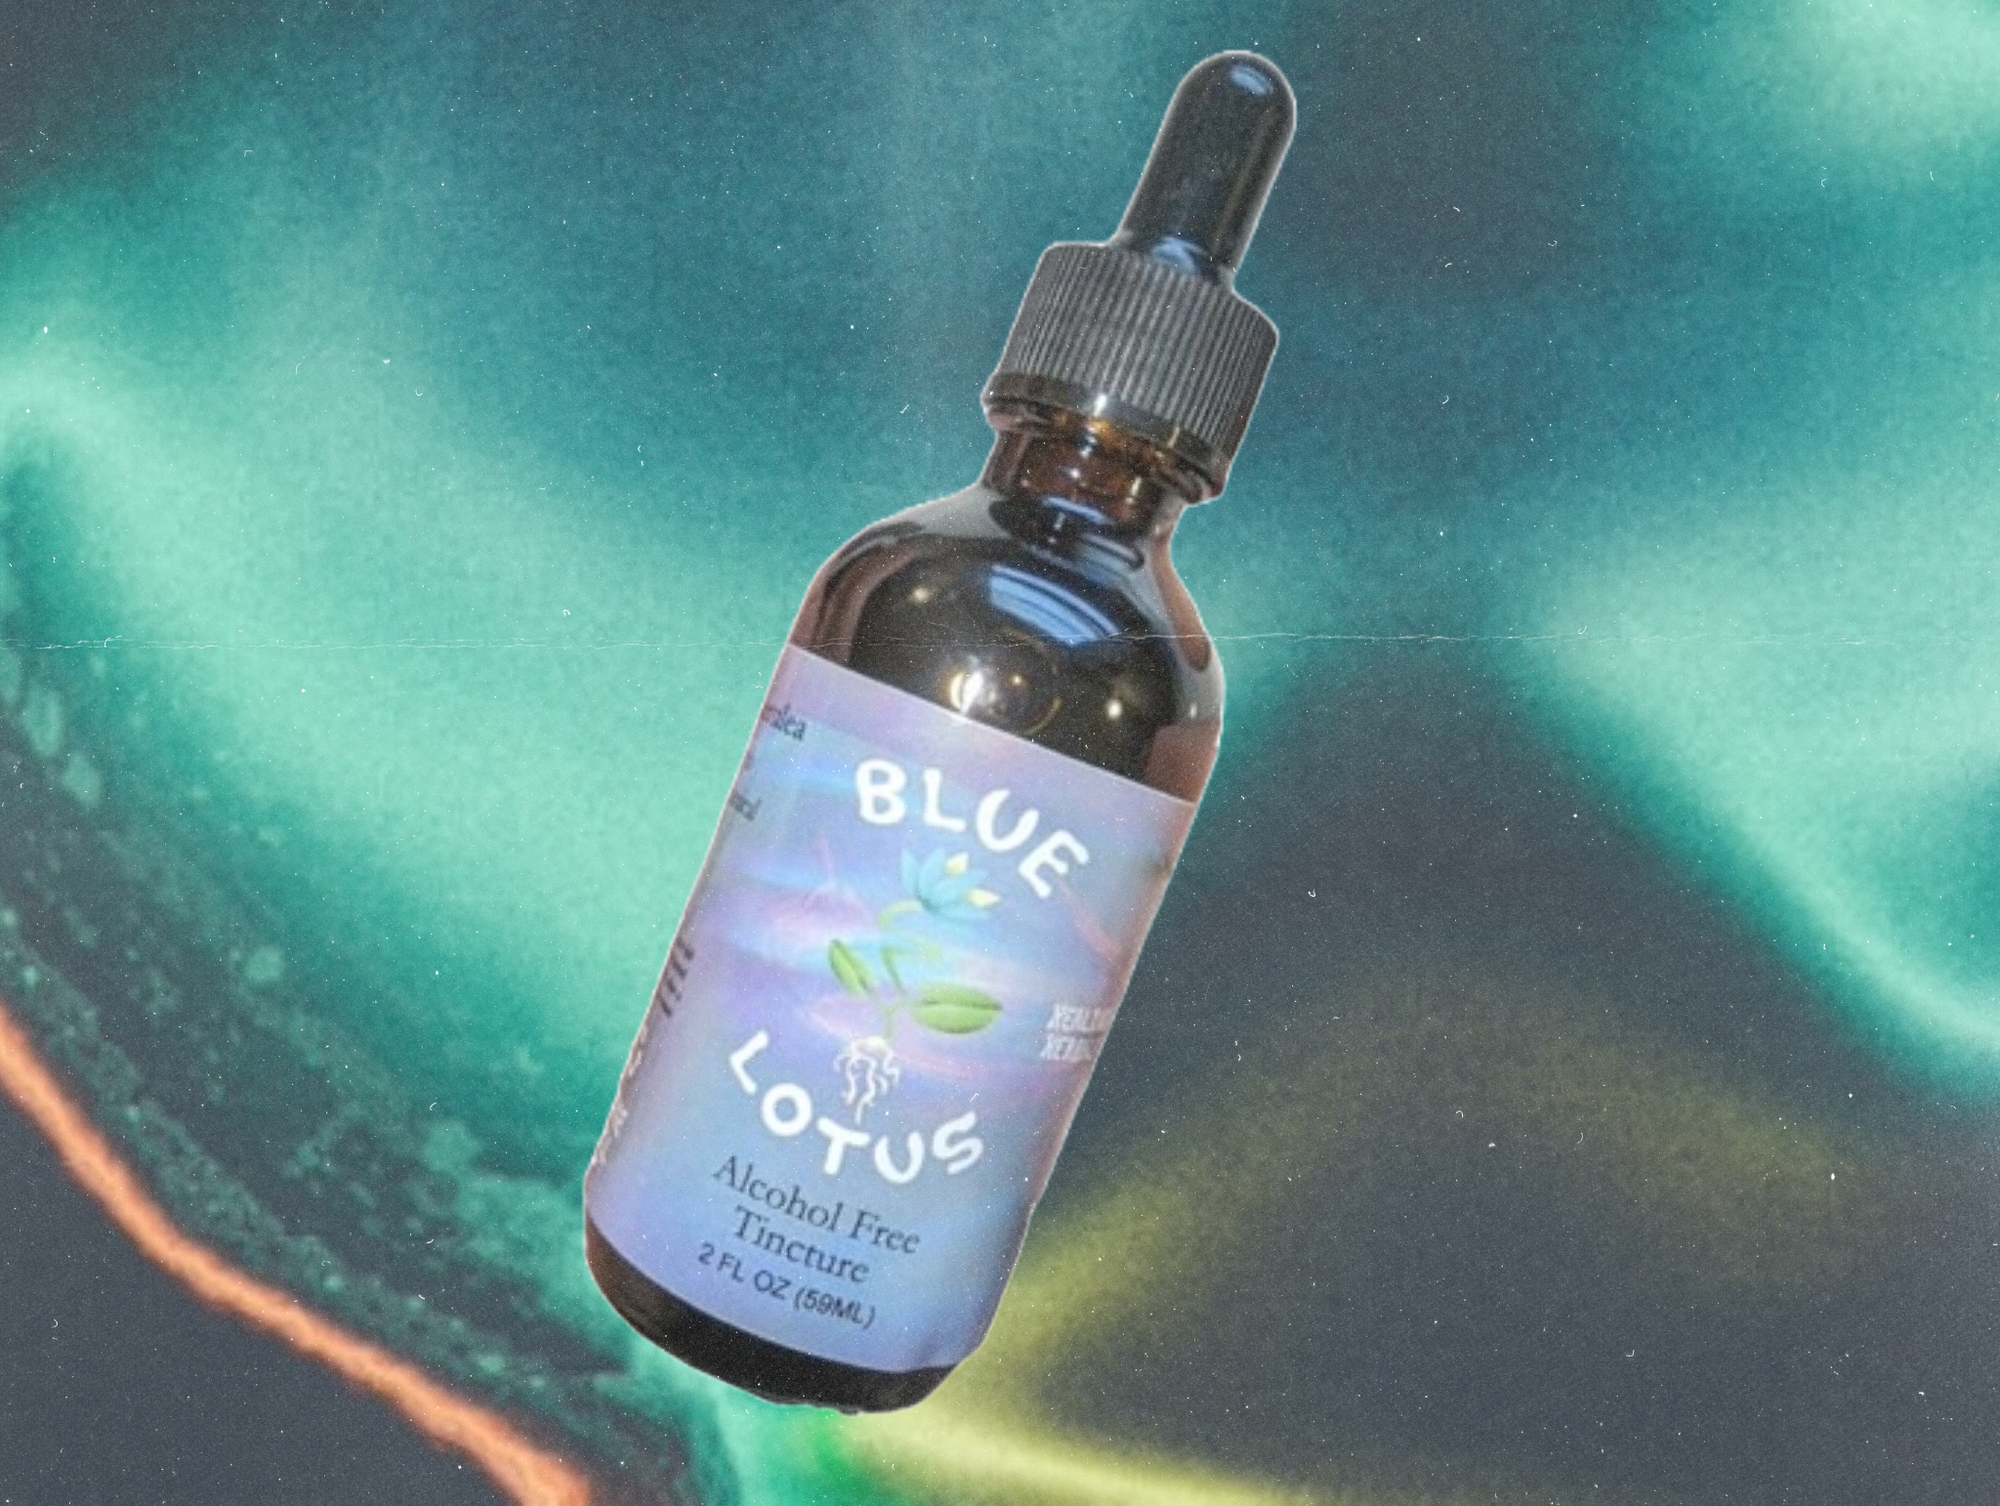 A blue lotus tincture over a psychedelic background mainly green. The blue lotus tincture is a brown glass bottle. Logo is a blue lotus flower flowing and slightly elongated / exaggerated 